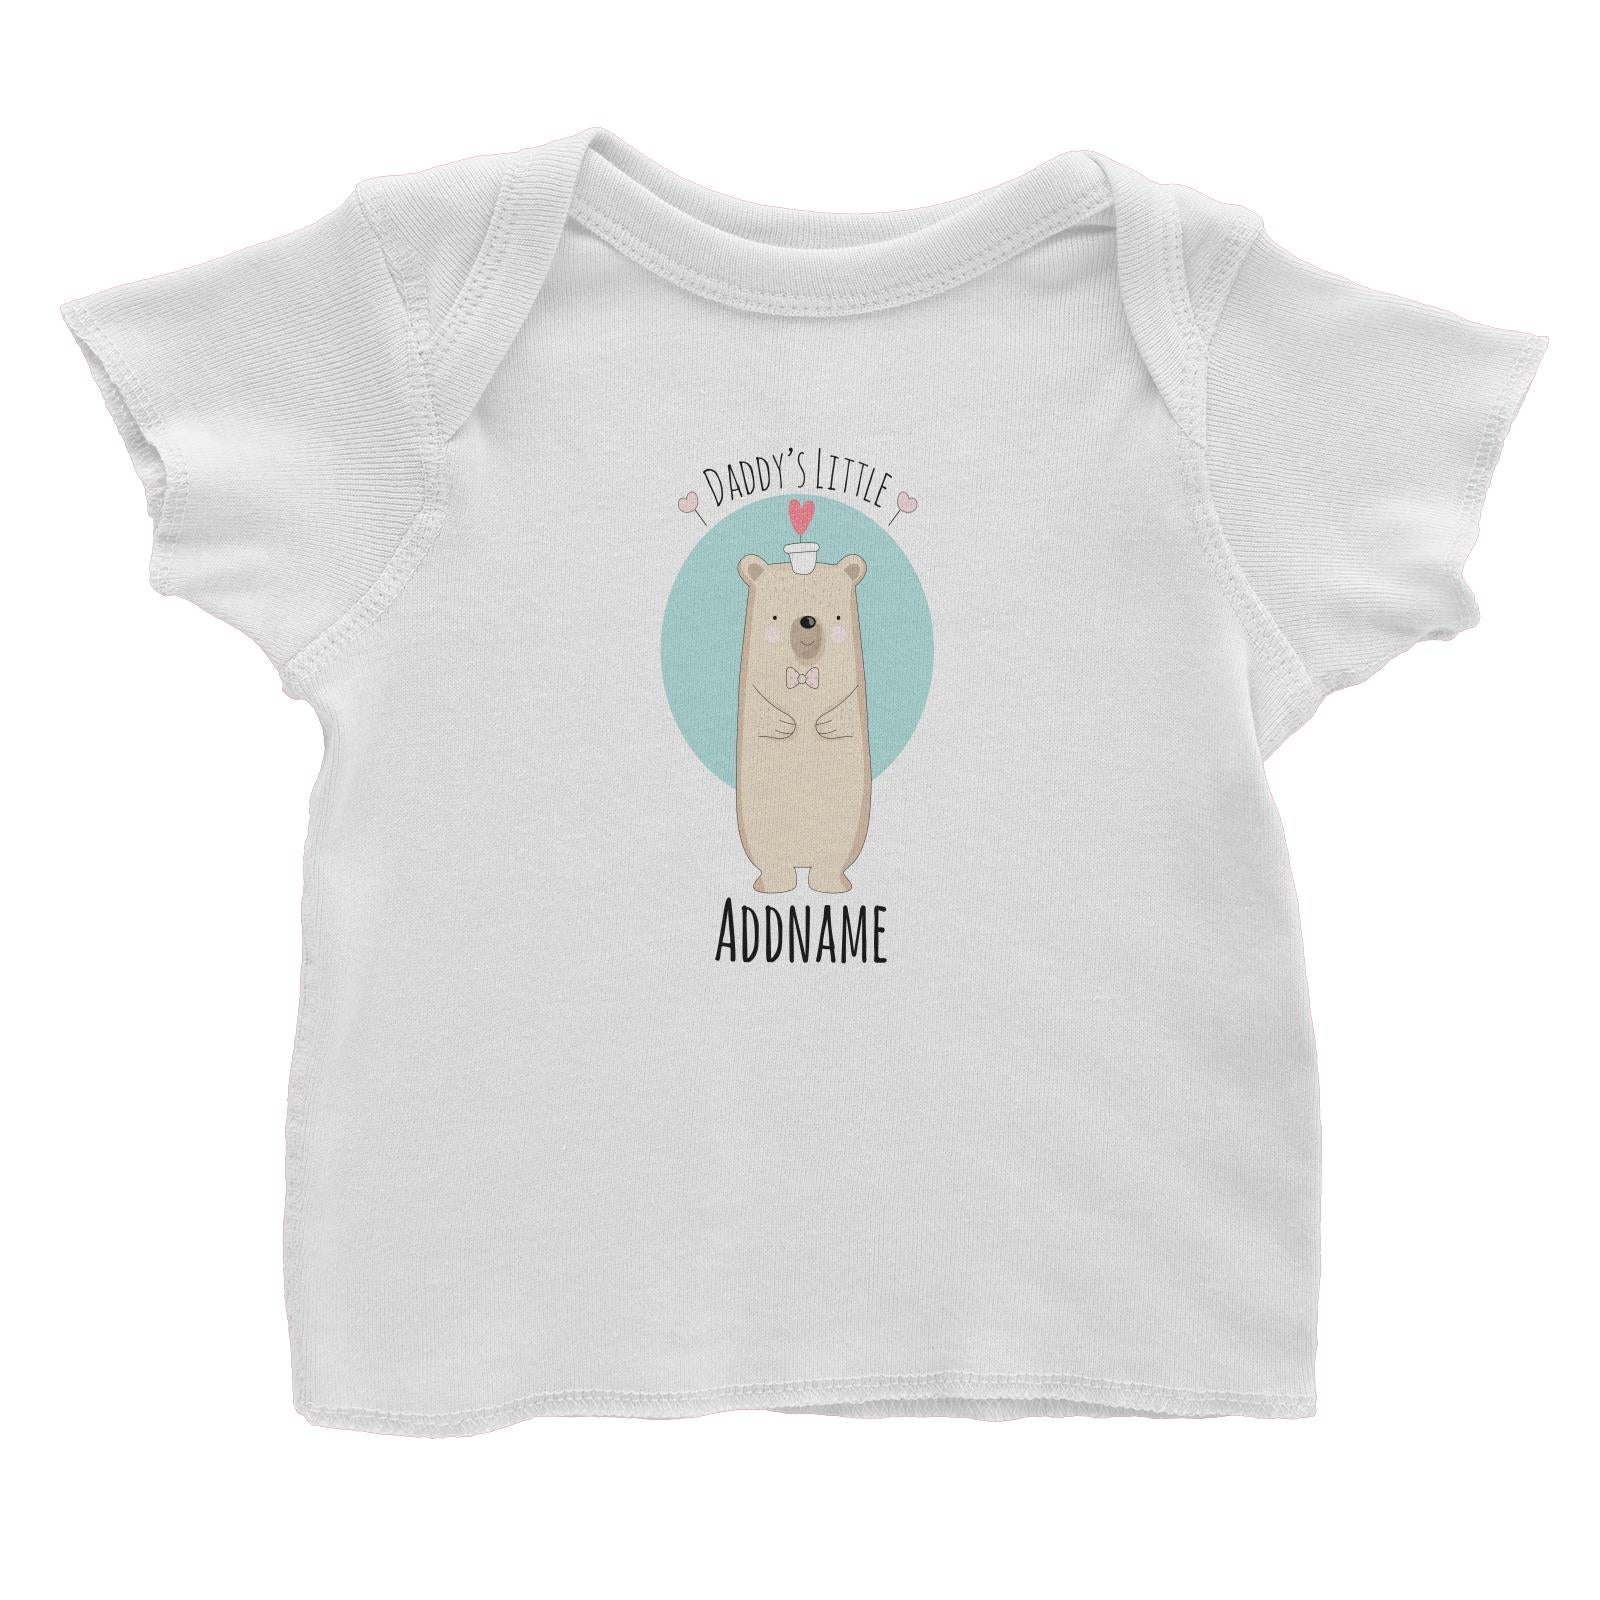 Sweet Animals Sketches Daddy's Little Bear Addname Baby T-Shirt